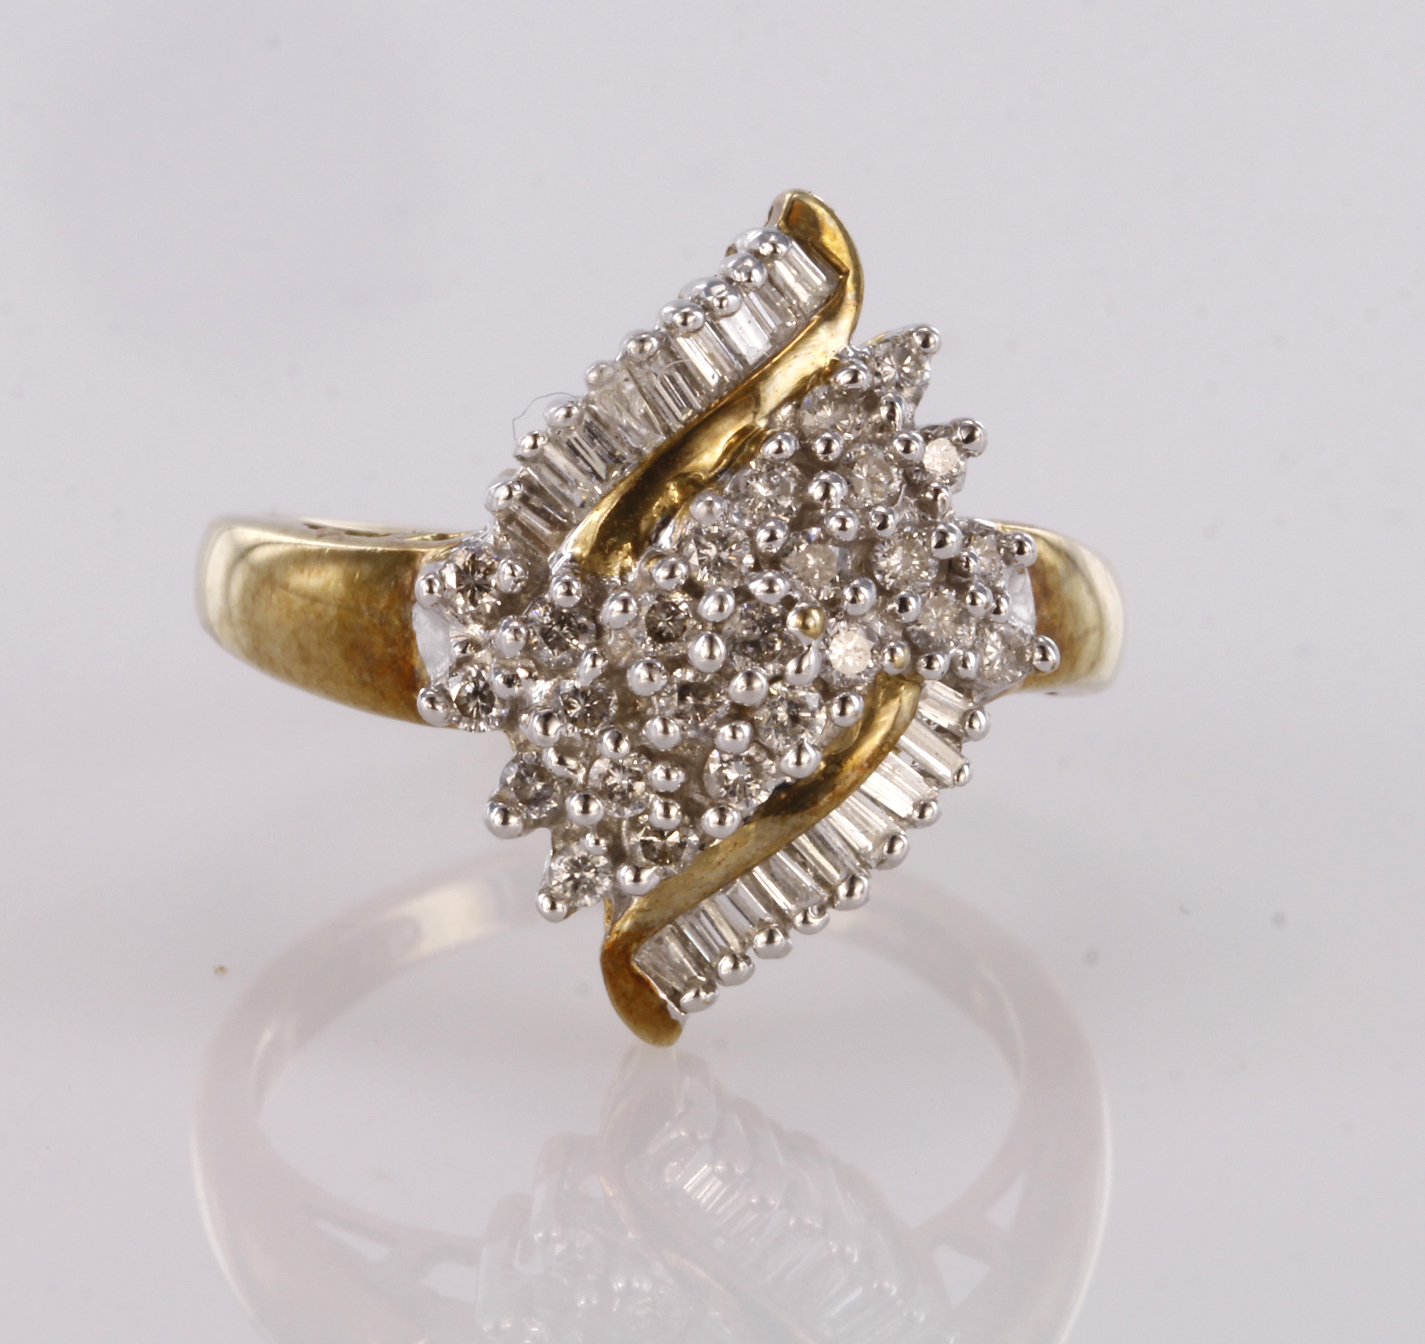 9ct yellow gold fancy diamond cluster ring set with round and baguette cut diamonds, approx. diamond